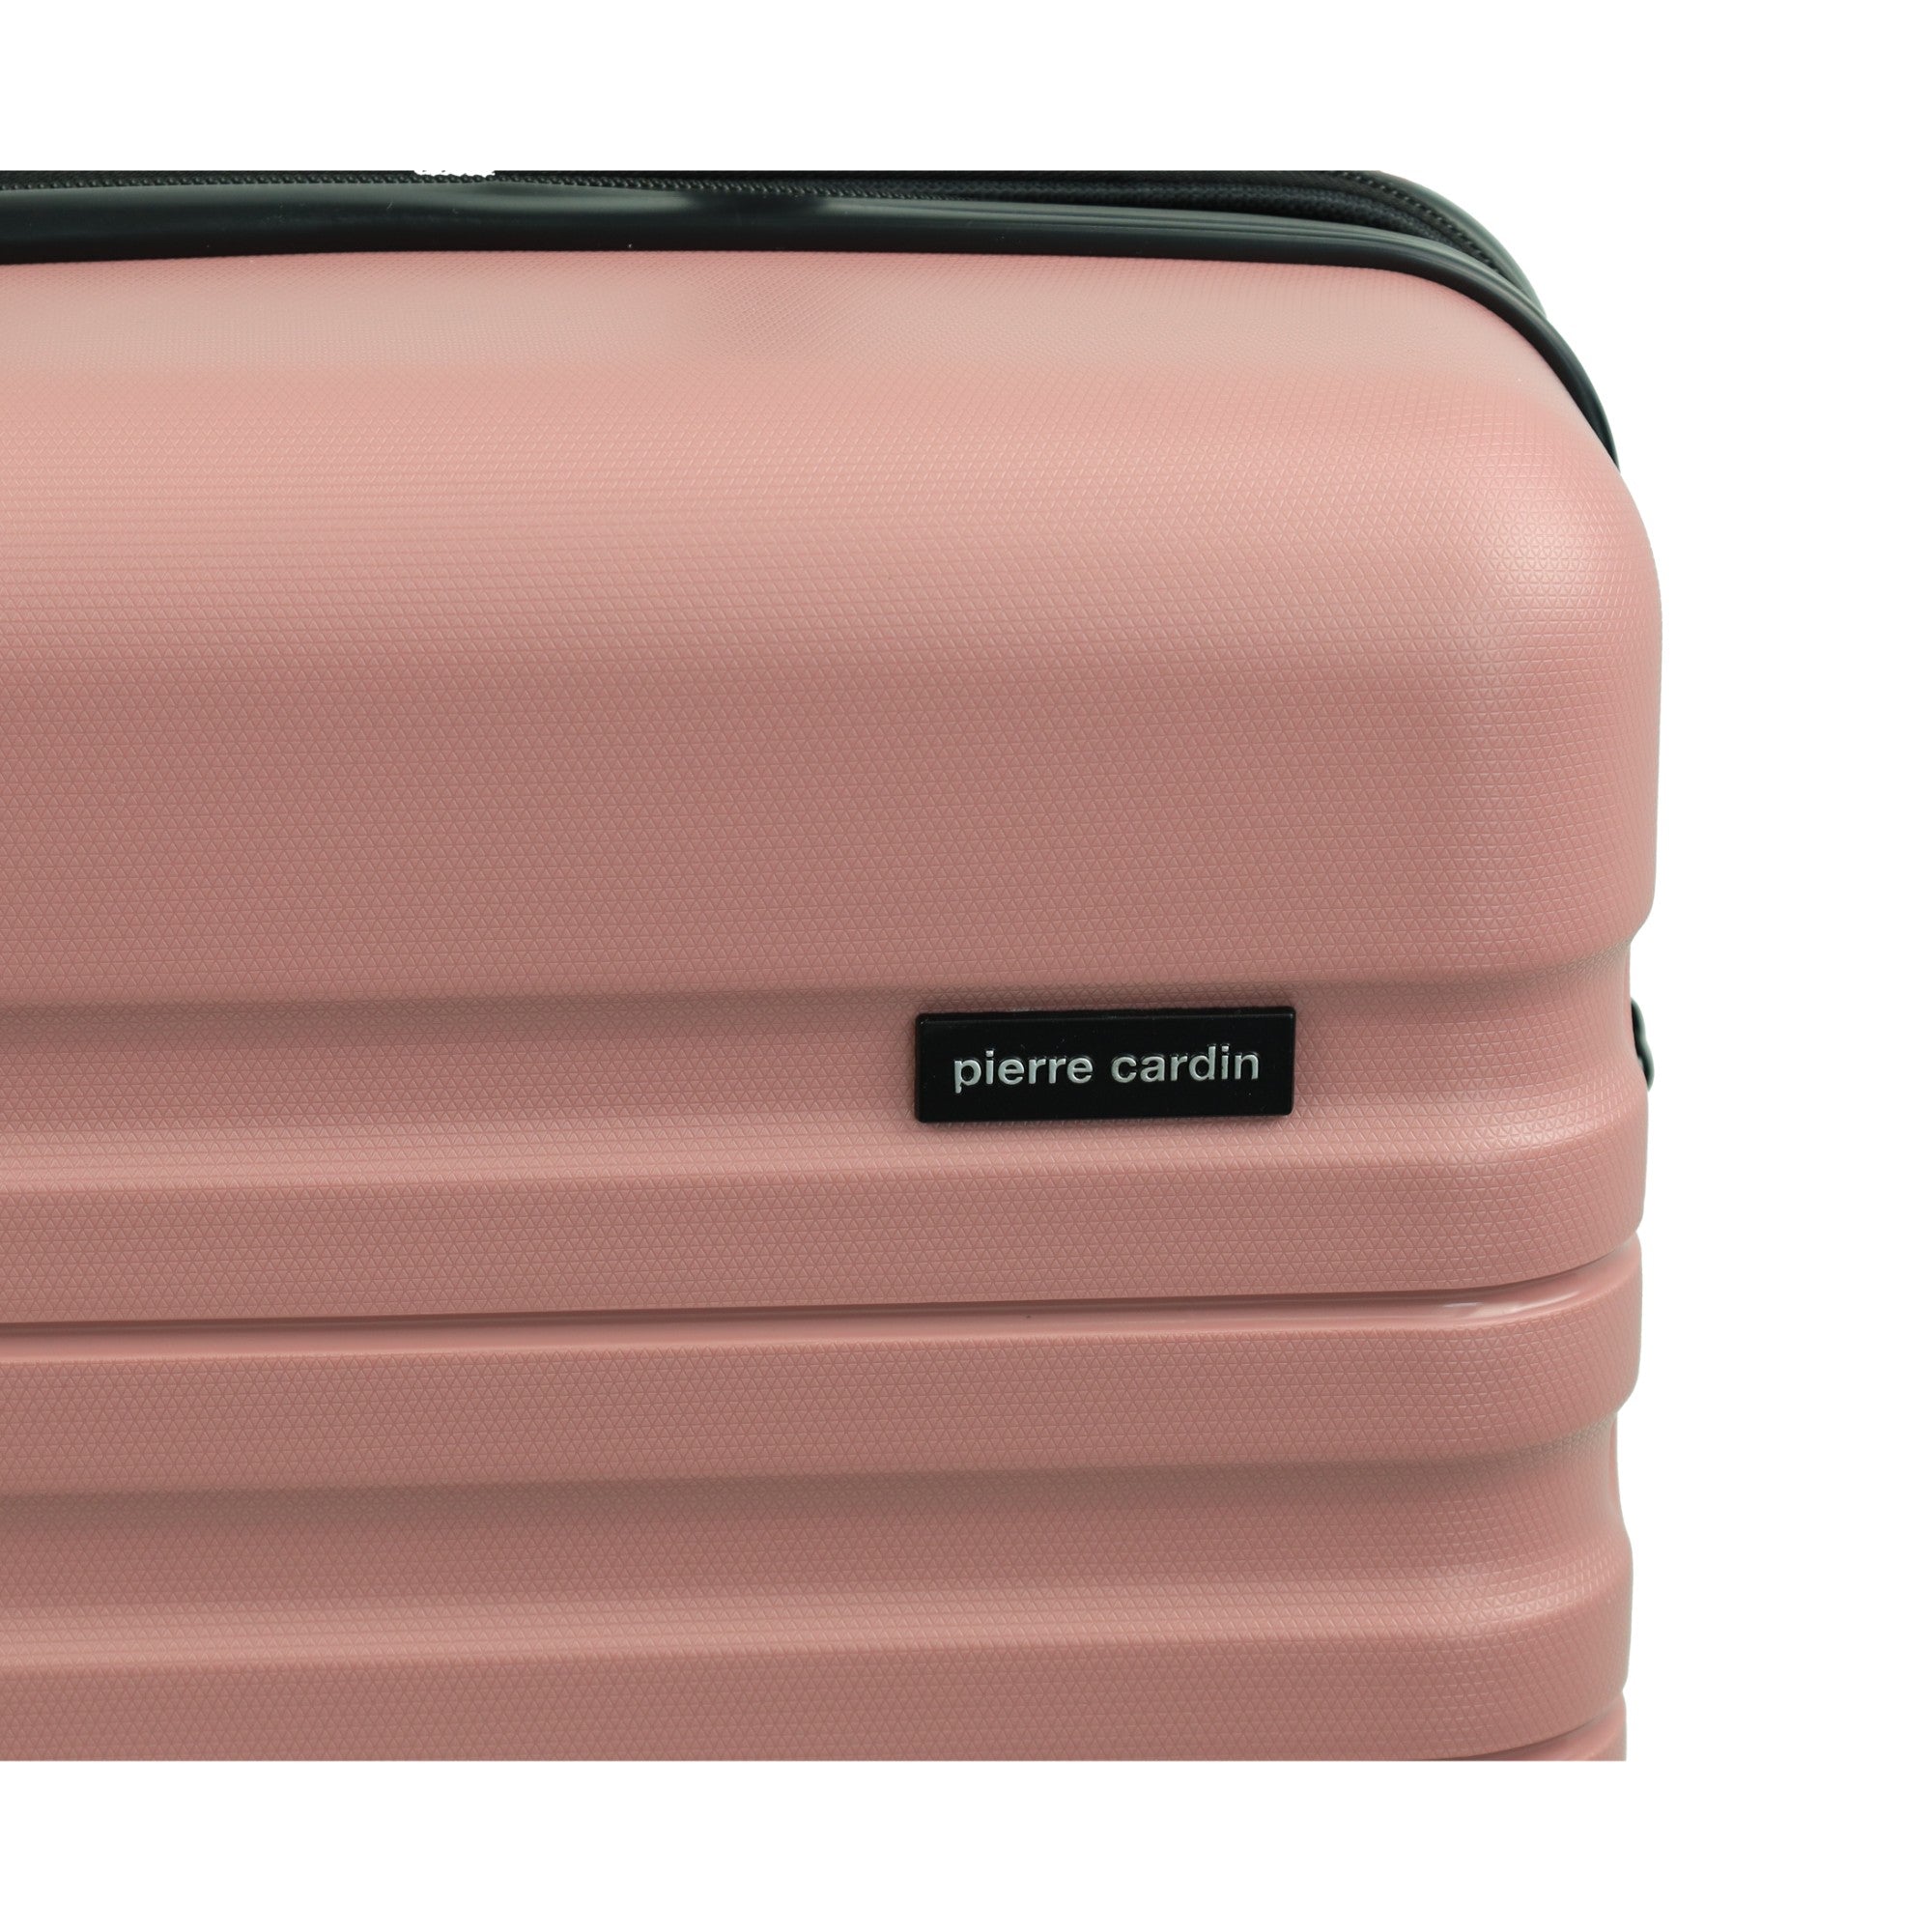 Pierre Cardin - PC3941C 54cm Small Cabin Hard Shell Suitcase - Rose-4